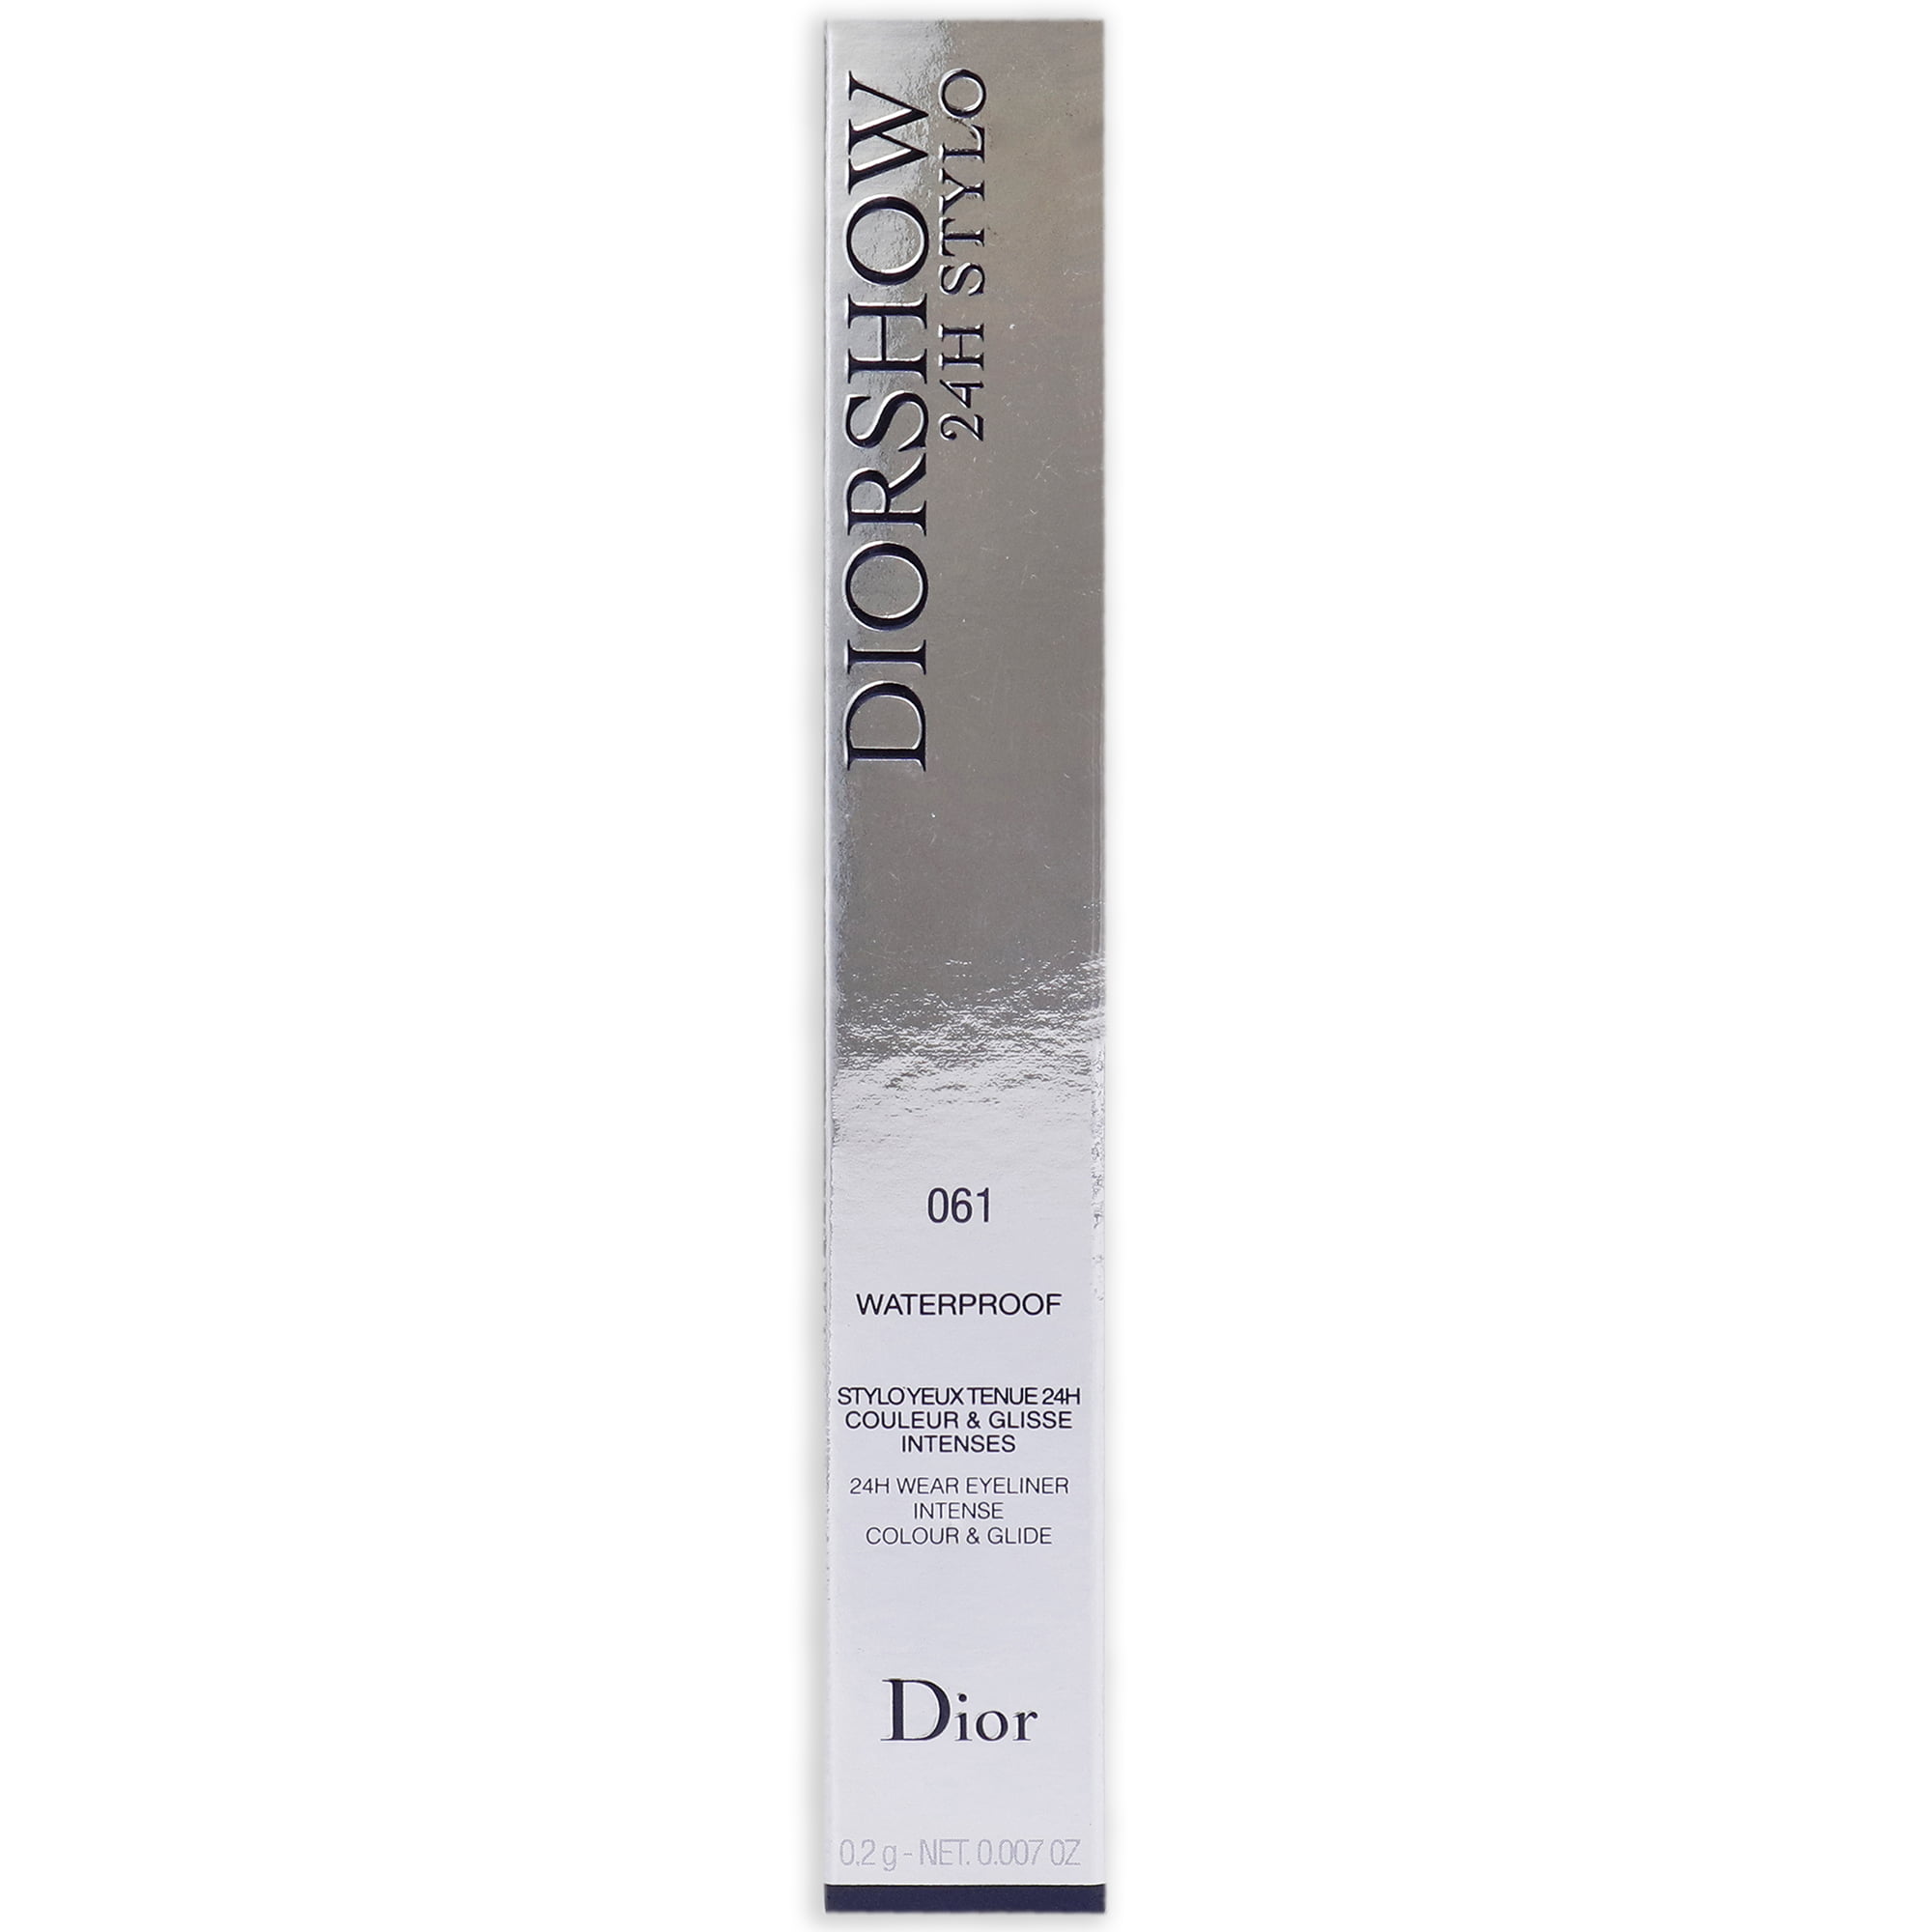 Dropship CHRISTIAN DIOR - Diorshow 24H Stylo Waterproof Eyeliner - # 061  Matte Grey C014300061 / 501071 0.2g/0.007oz to Sell Online at a Lower Price